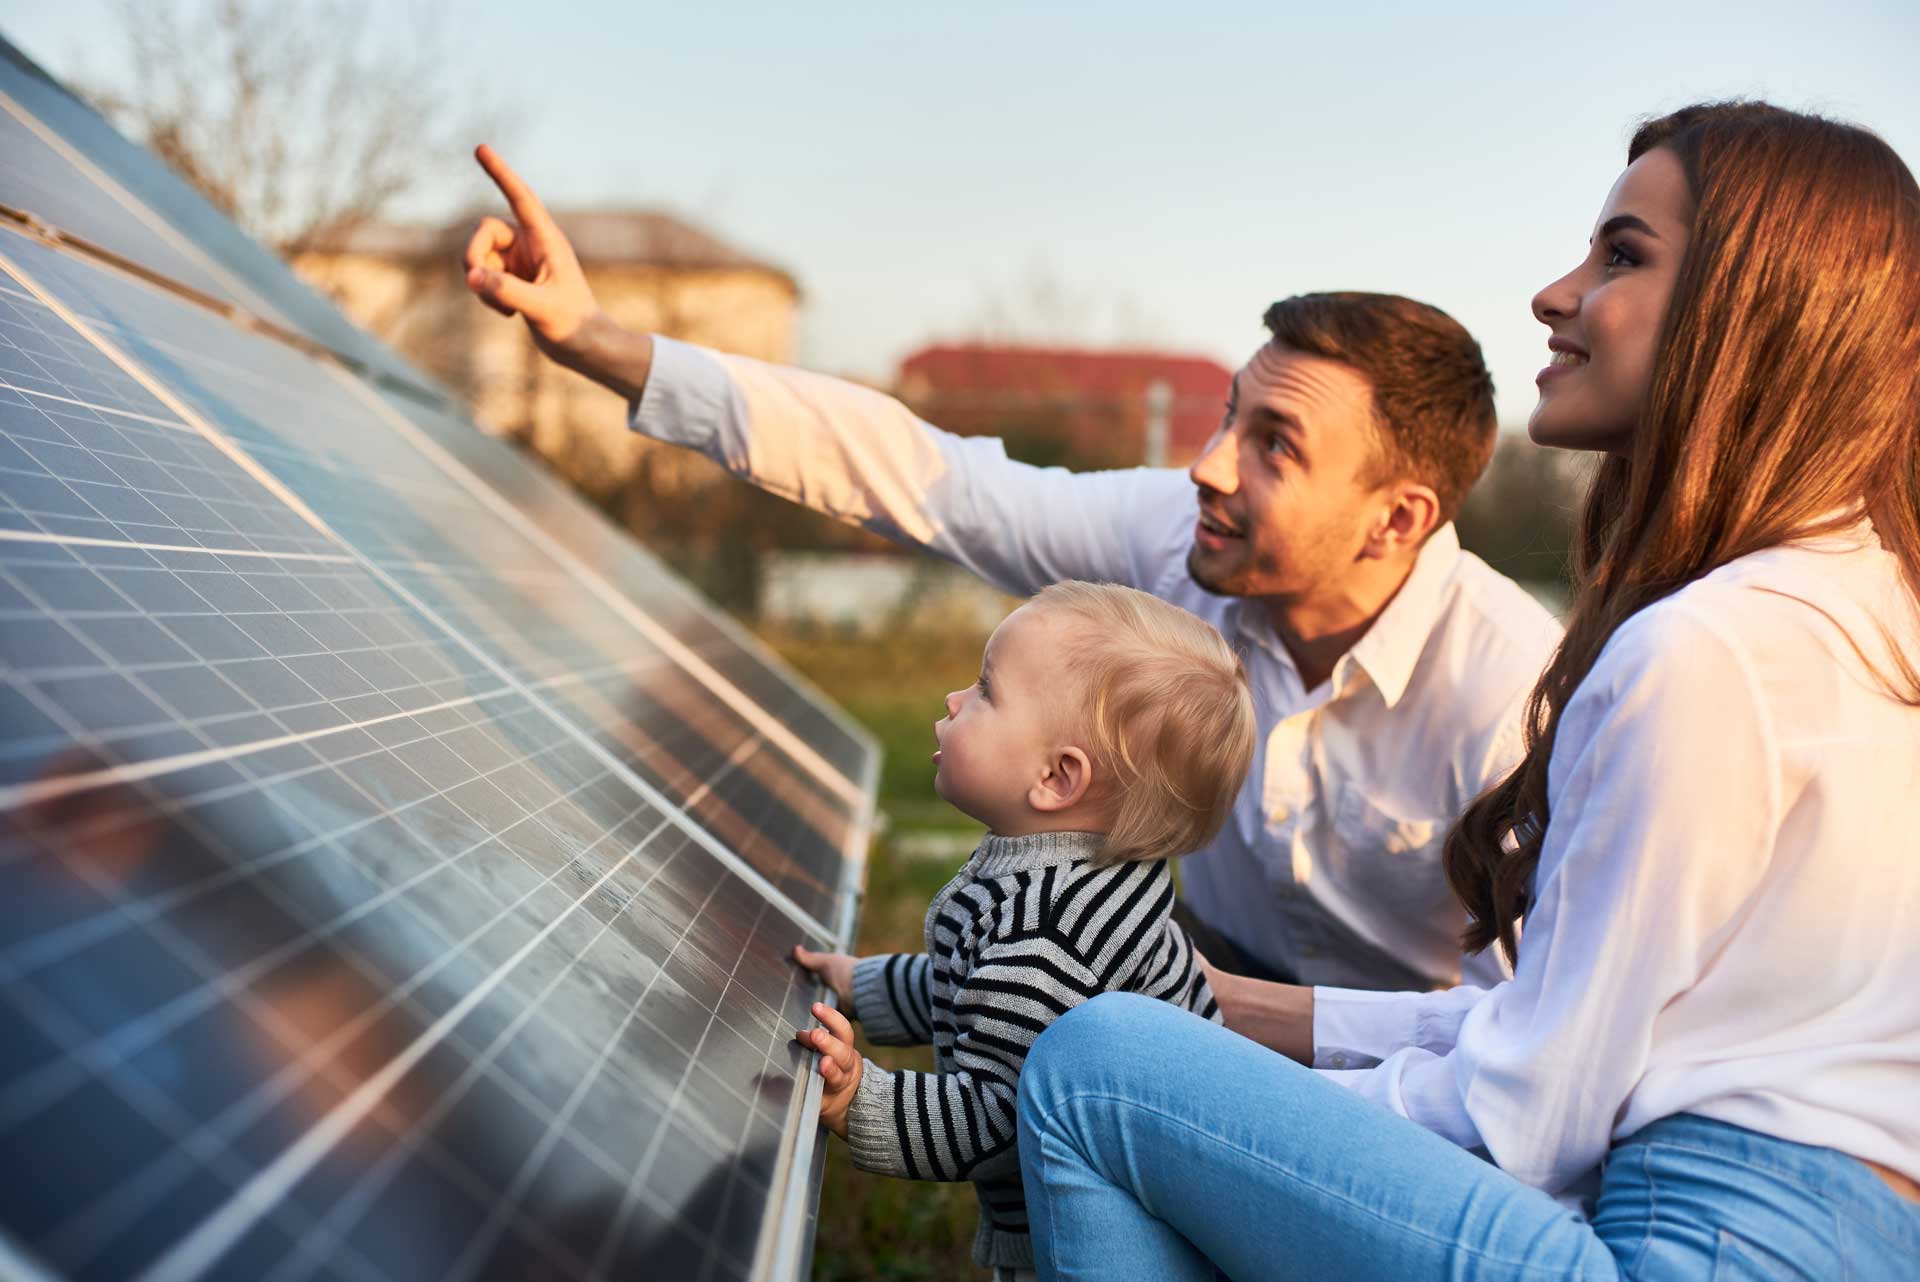 A family looking at a large solar panel